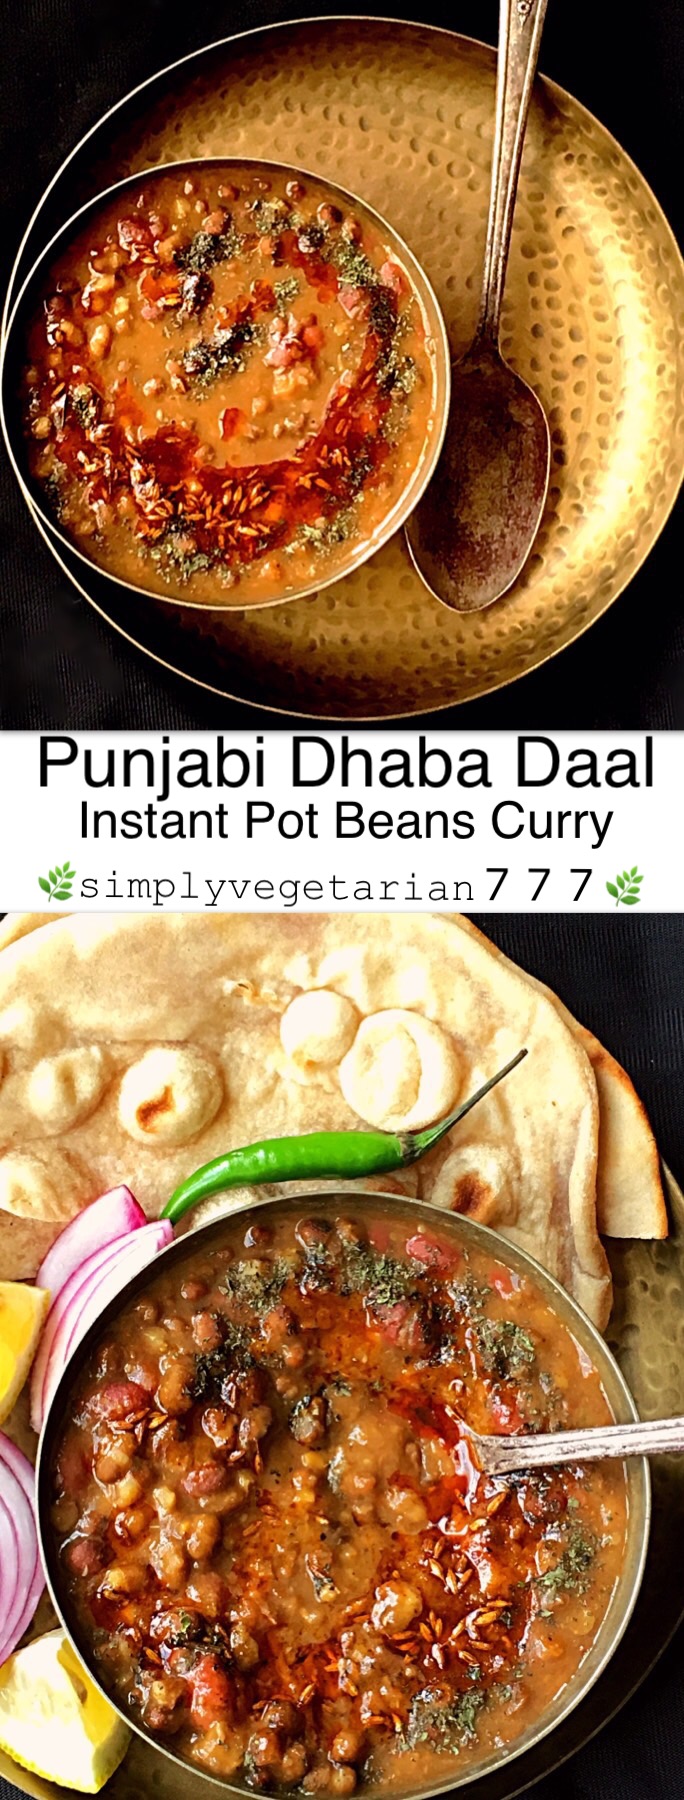 You are going to love this Punjabi Dhaaba Daal Instant Pot Recipe. It is finger licking delish and every bite is worth devouring. Creamy and Decadent and what not. It tastes best with Tandoori Roti in my opinion. But goes very well with Rice and Naan too. Stove top instructions + small video included too. #instantpotrecipes #instantpotlentils #instantpotindianrecipes #instantpotdaal #instantpotbeans #dhaabadaal 